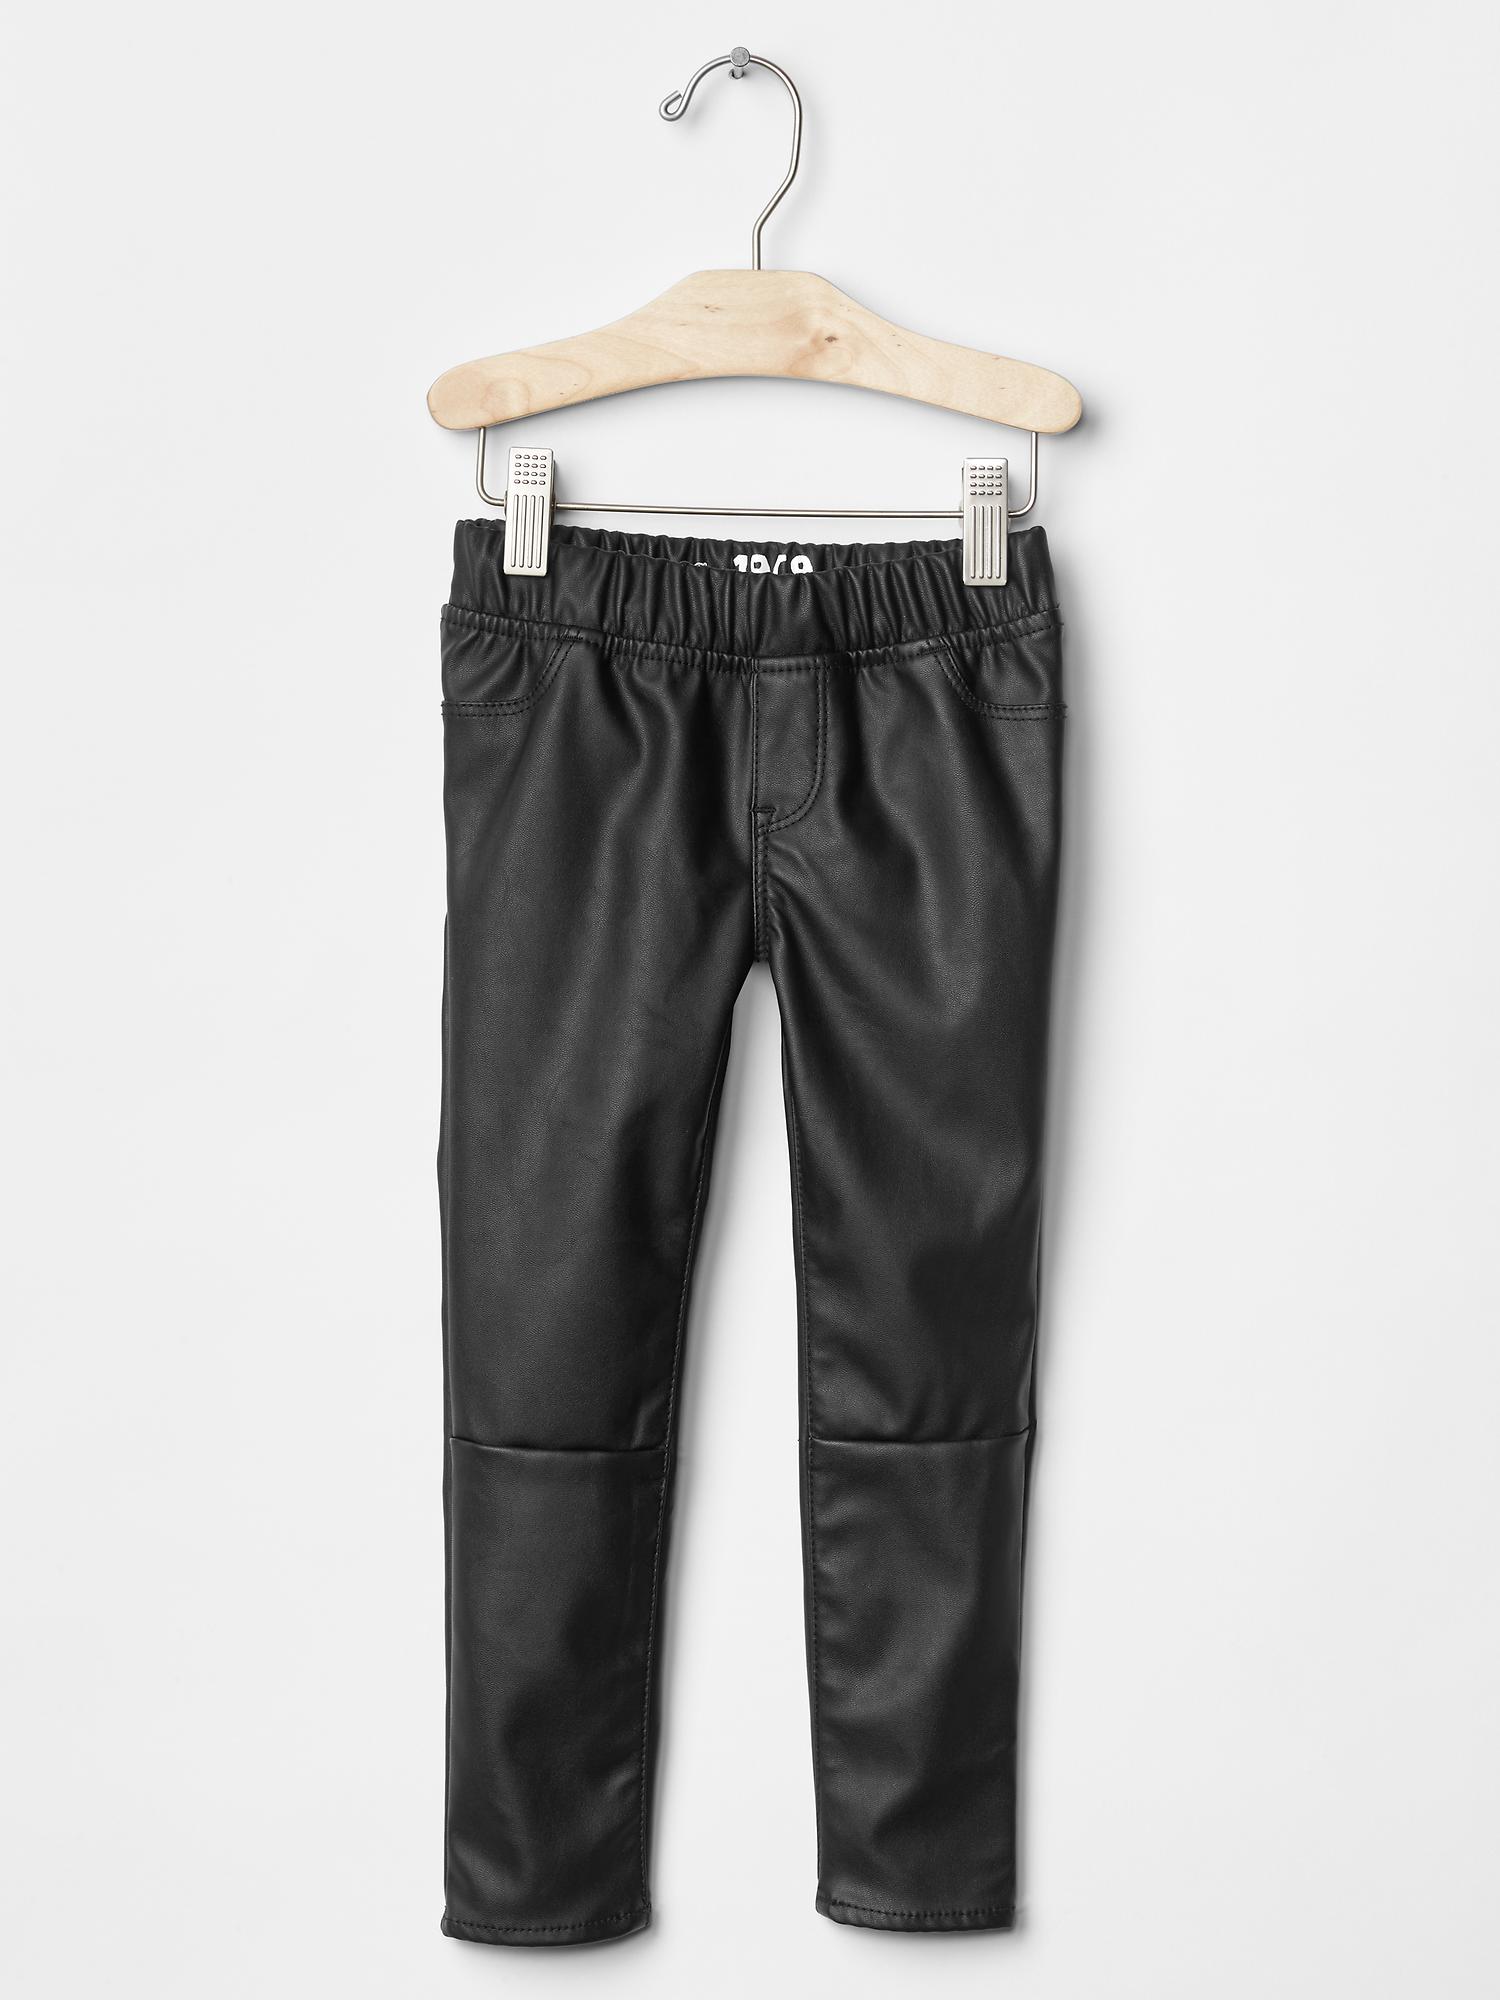 H&M Black Leather Leggings / Pants Size M - $24 - From Brianna